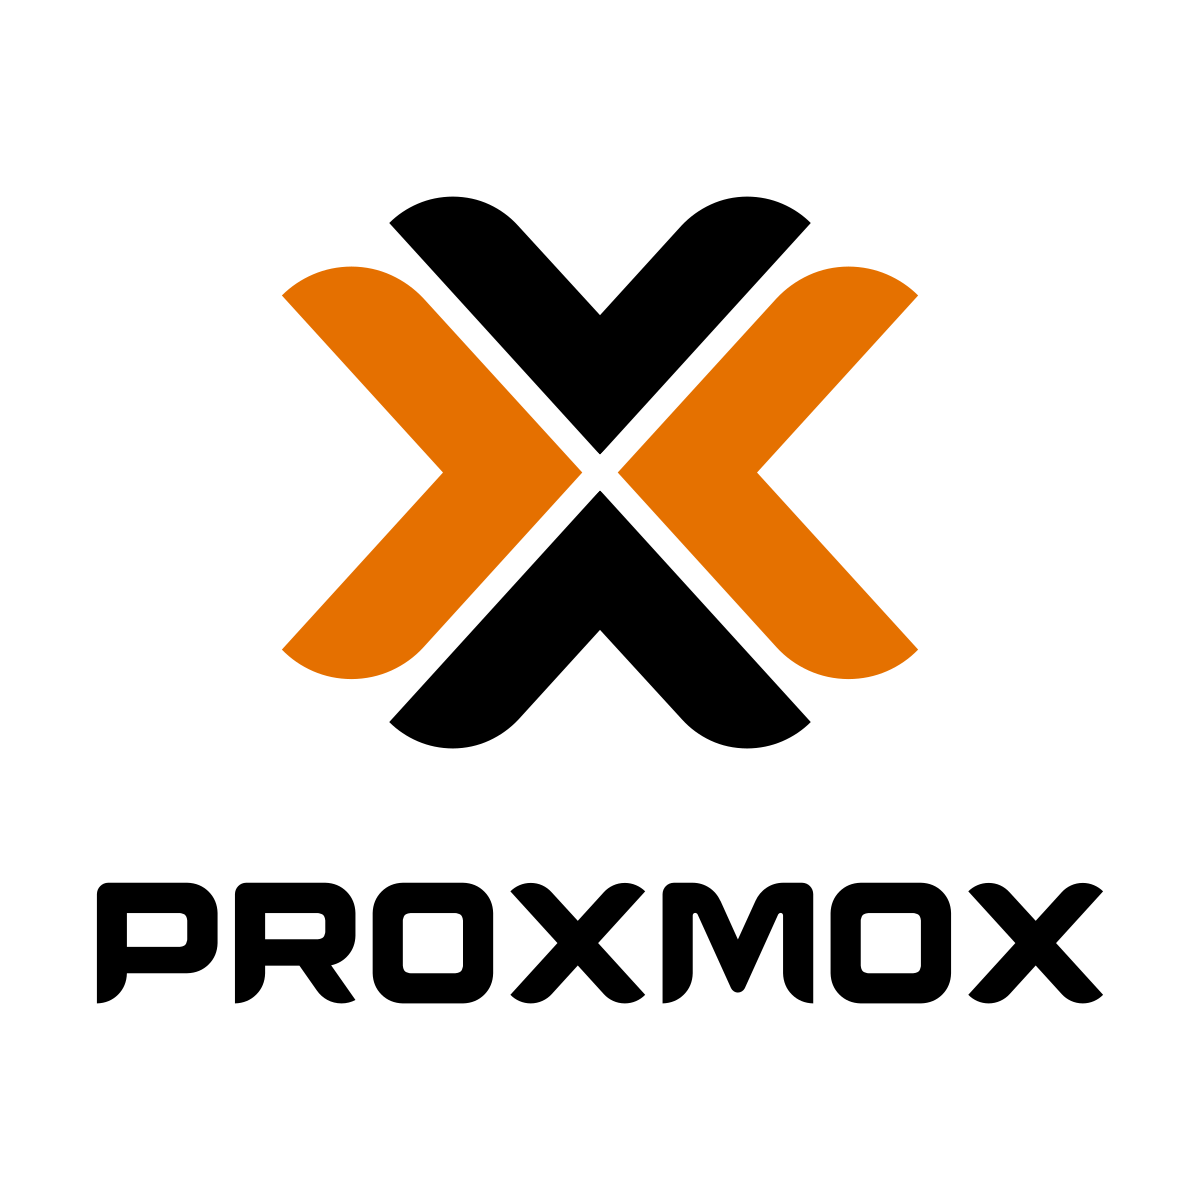 Proxmox-logo-stacked-white-background-1200.png